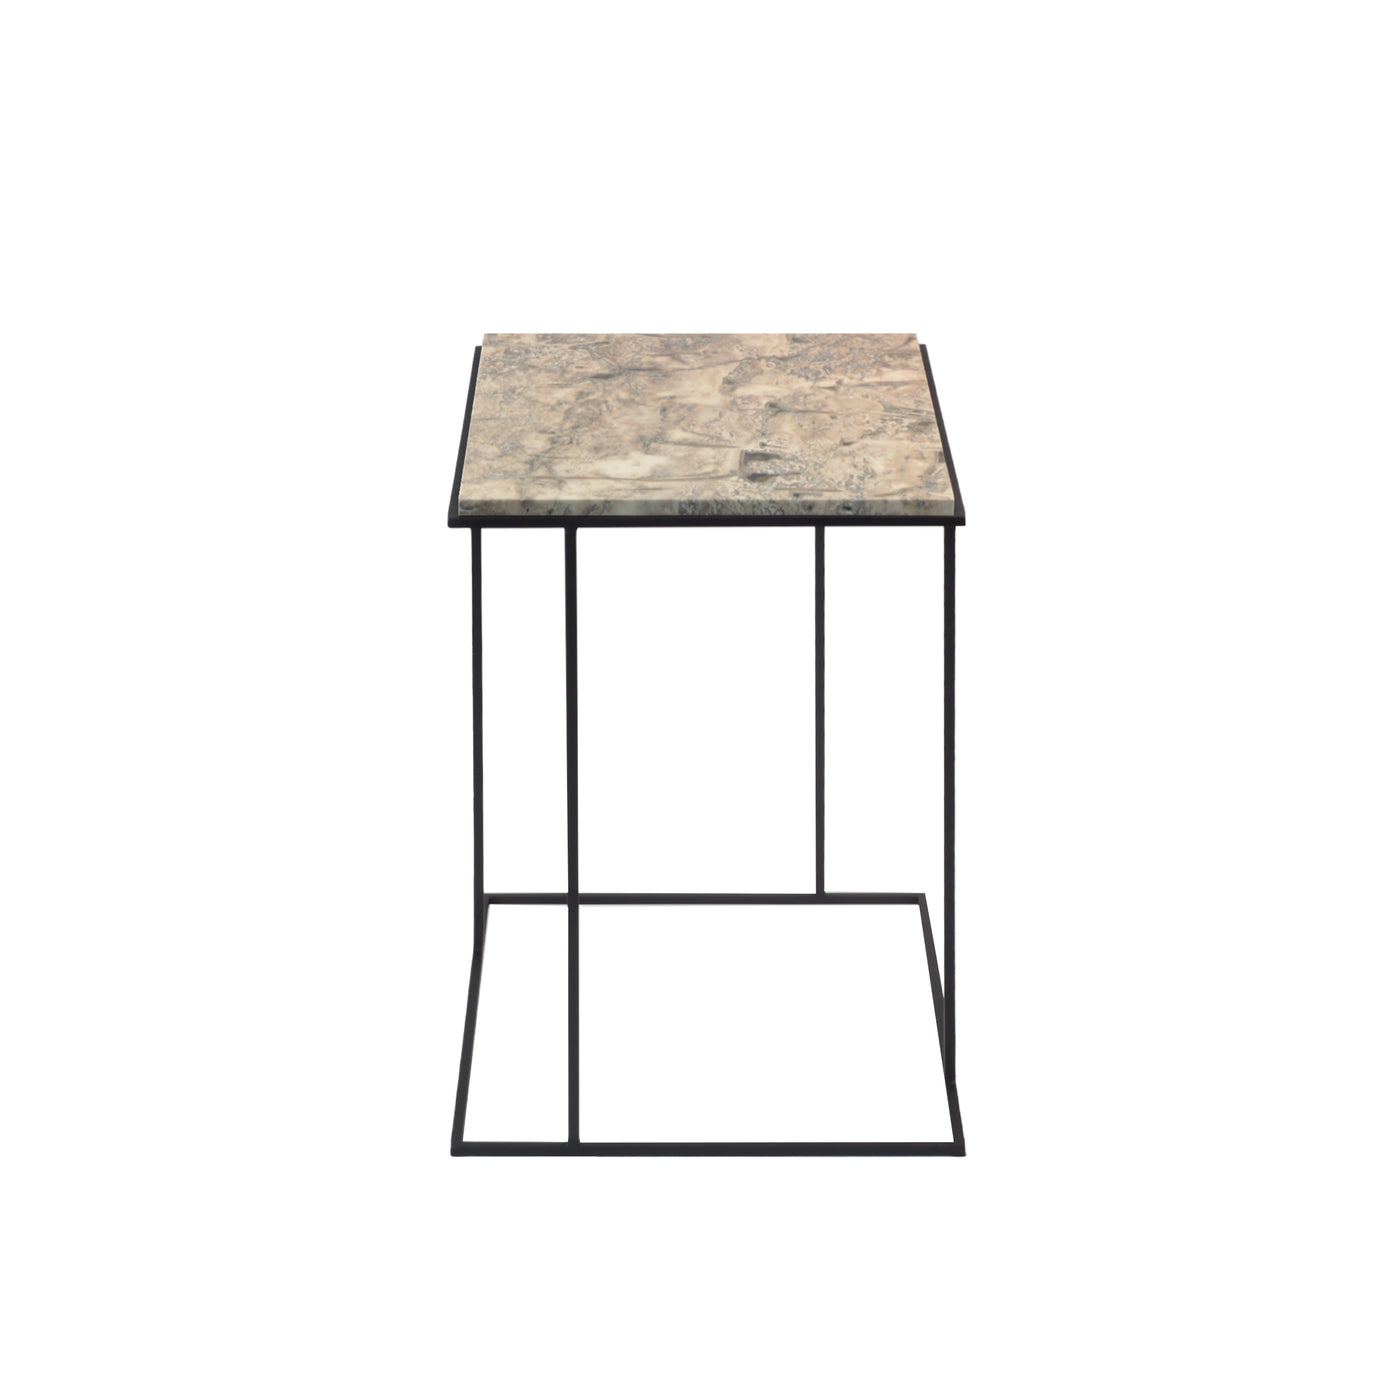 Stone Side Table FRAME by Nicola Di Froscia for DFdesignLab 021